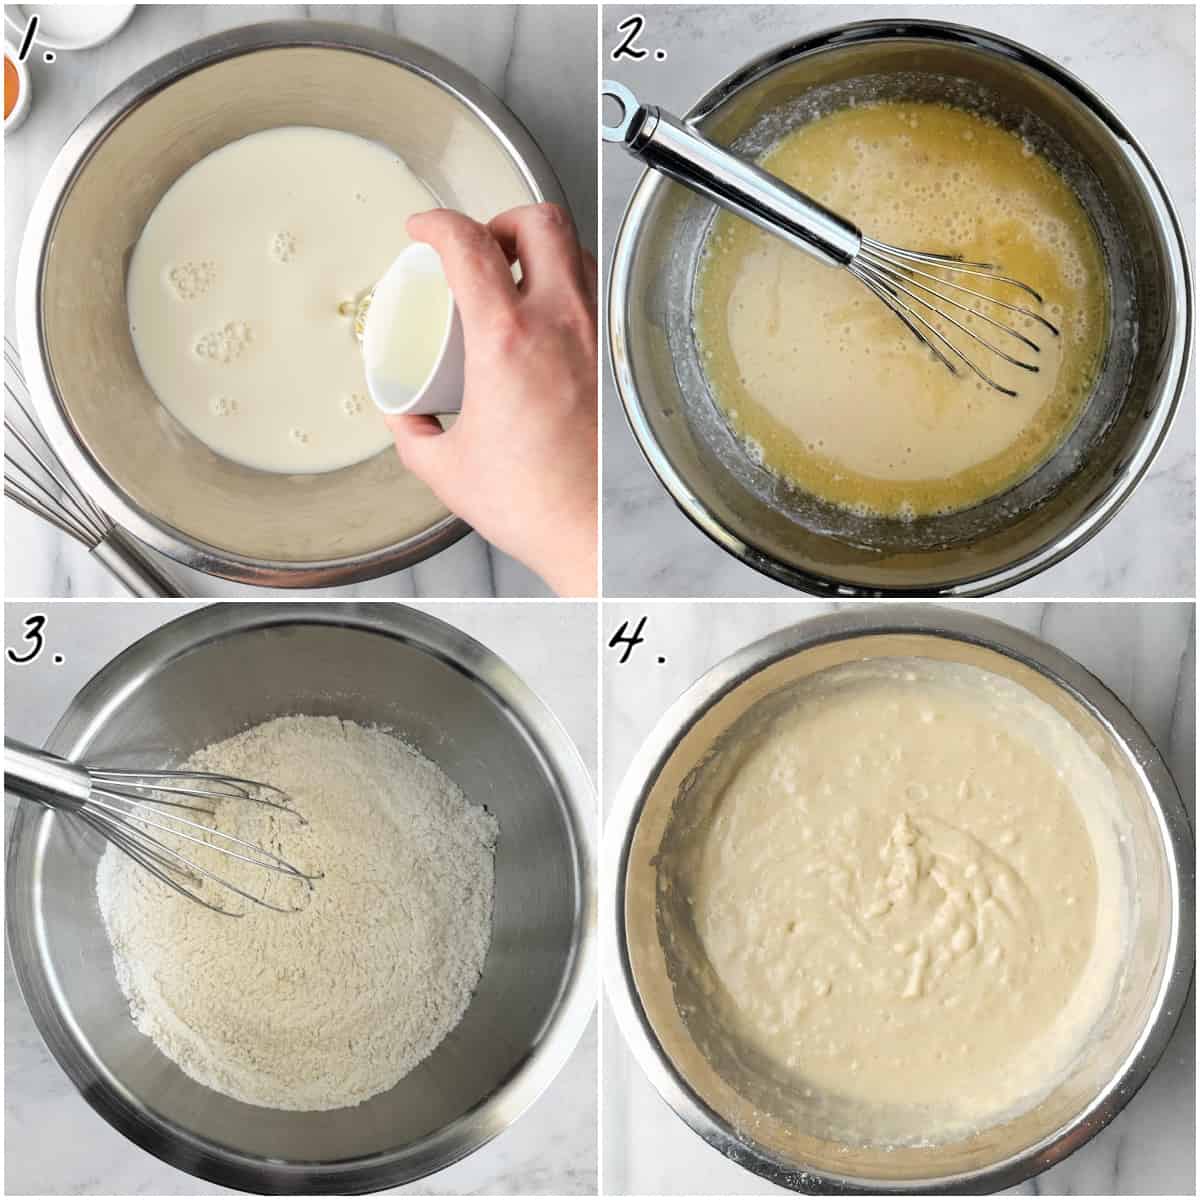 Four process photos sowing how to make batter in a mixing bowl.